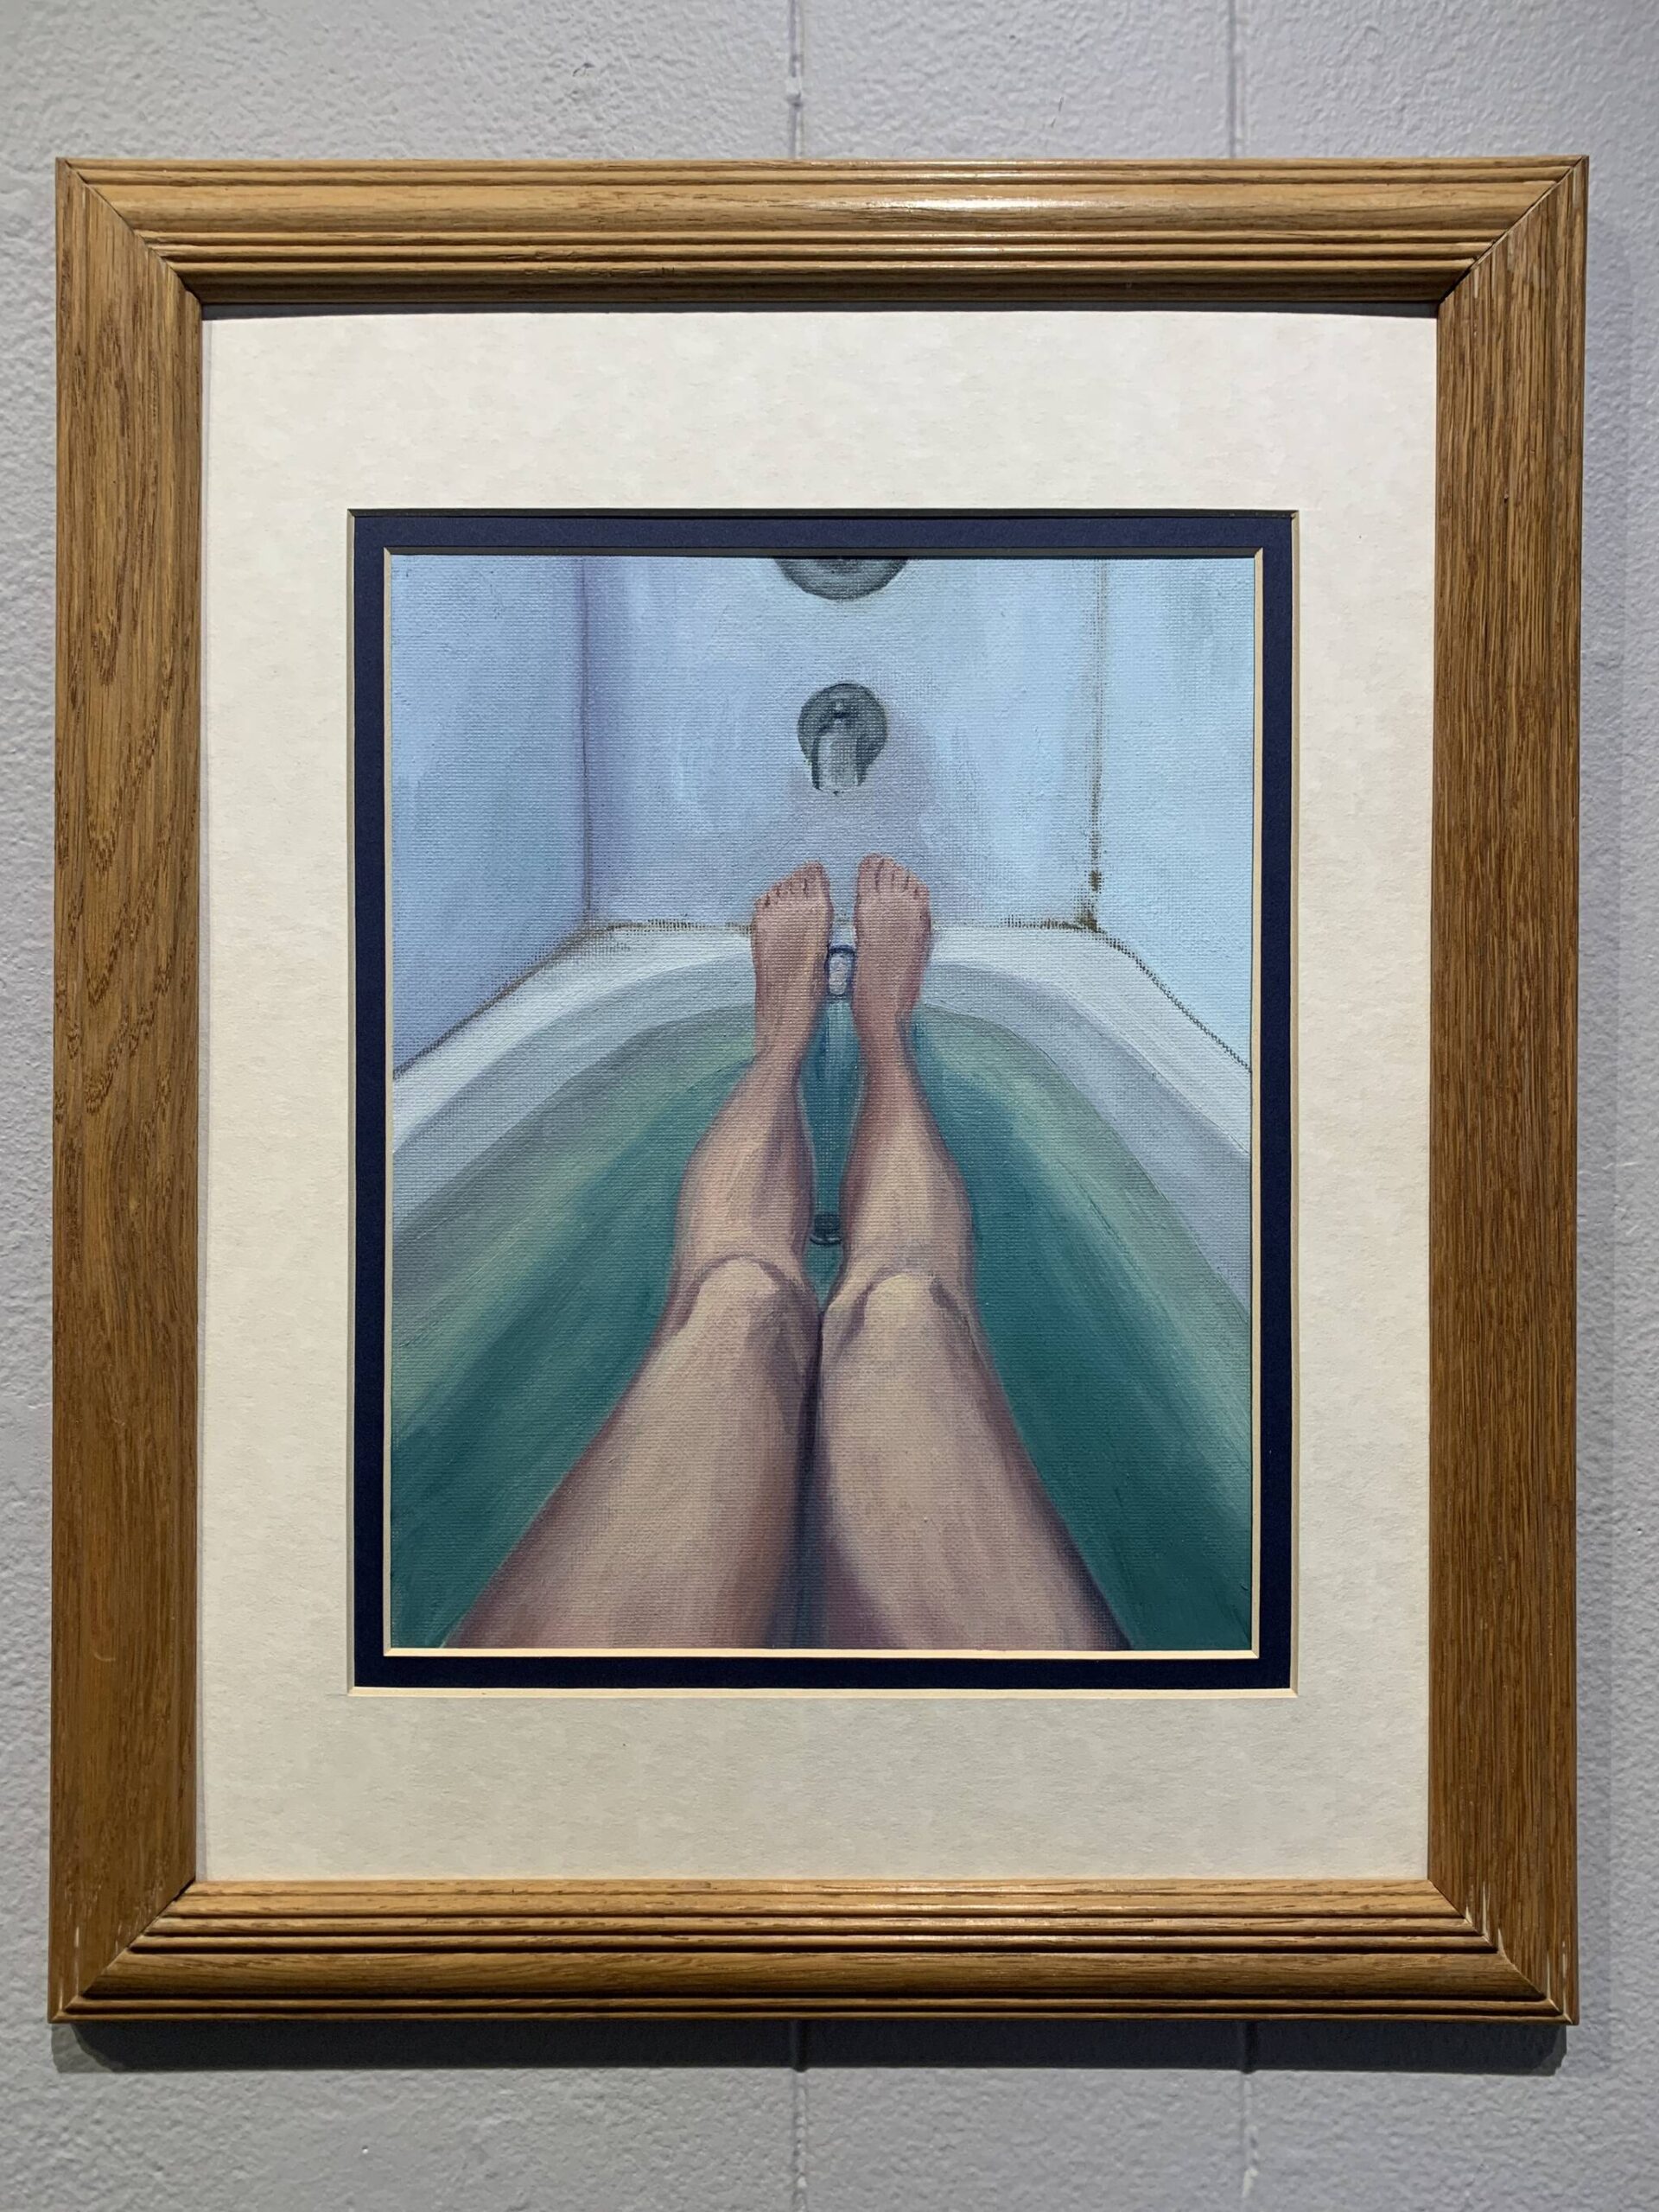 “Self Care,” a painting by Jenna Gerrety, is on display March 16 at Homer Council on the Arts through March as part of the “Bodily Autonomy” exhibit co-sponsored by Kachemak Bay Family Planning Clinic. (Photo by Christina Whiting/Homer News)